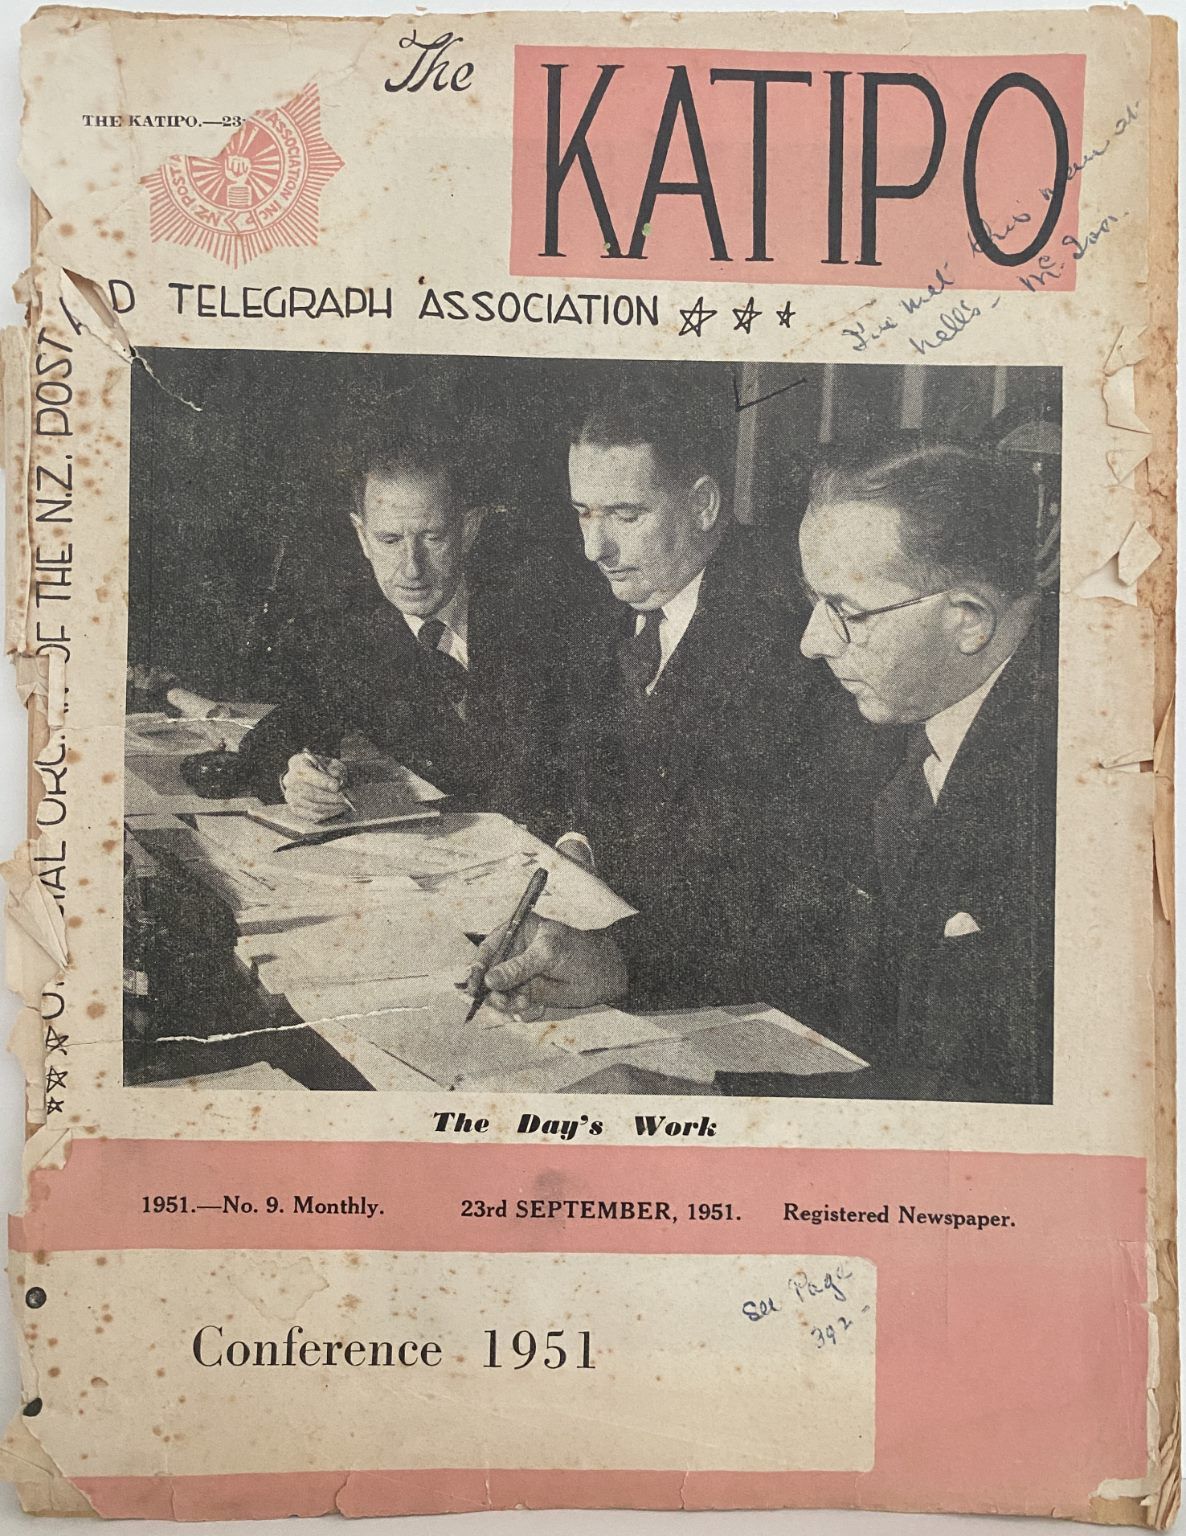 THE KATIPO: New Zealand Post & Telegraph Association - Conference 1951